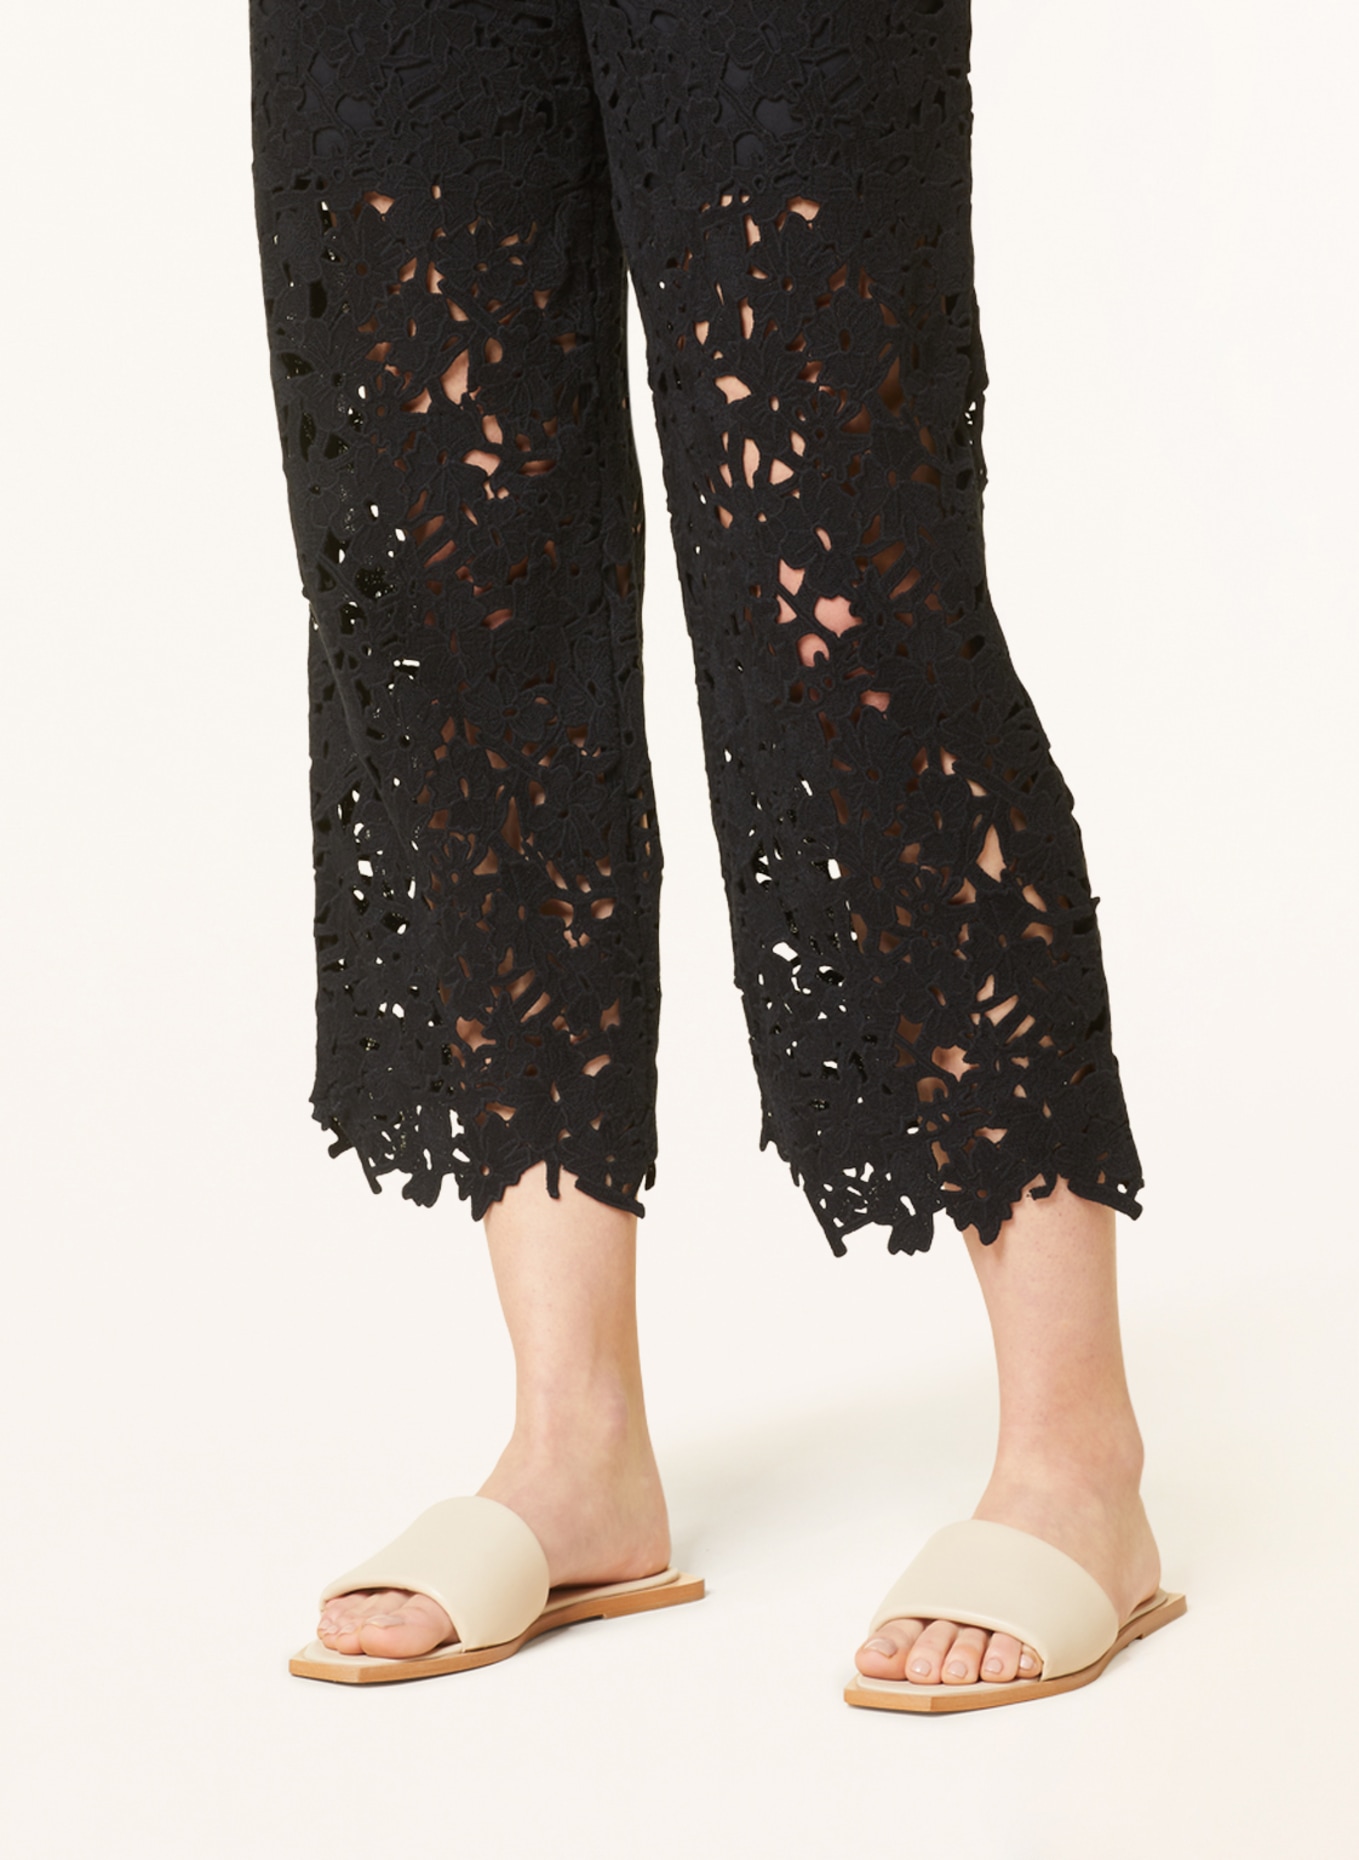 COS 7/8 trousers made of crochet lace, Color: BLACK (Image 5)